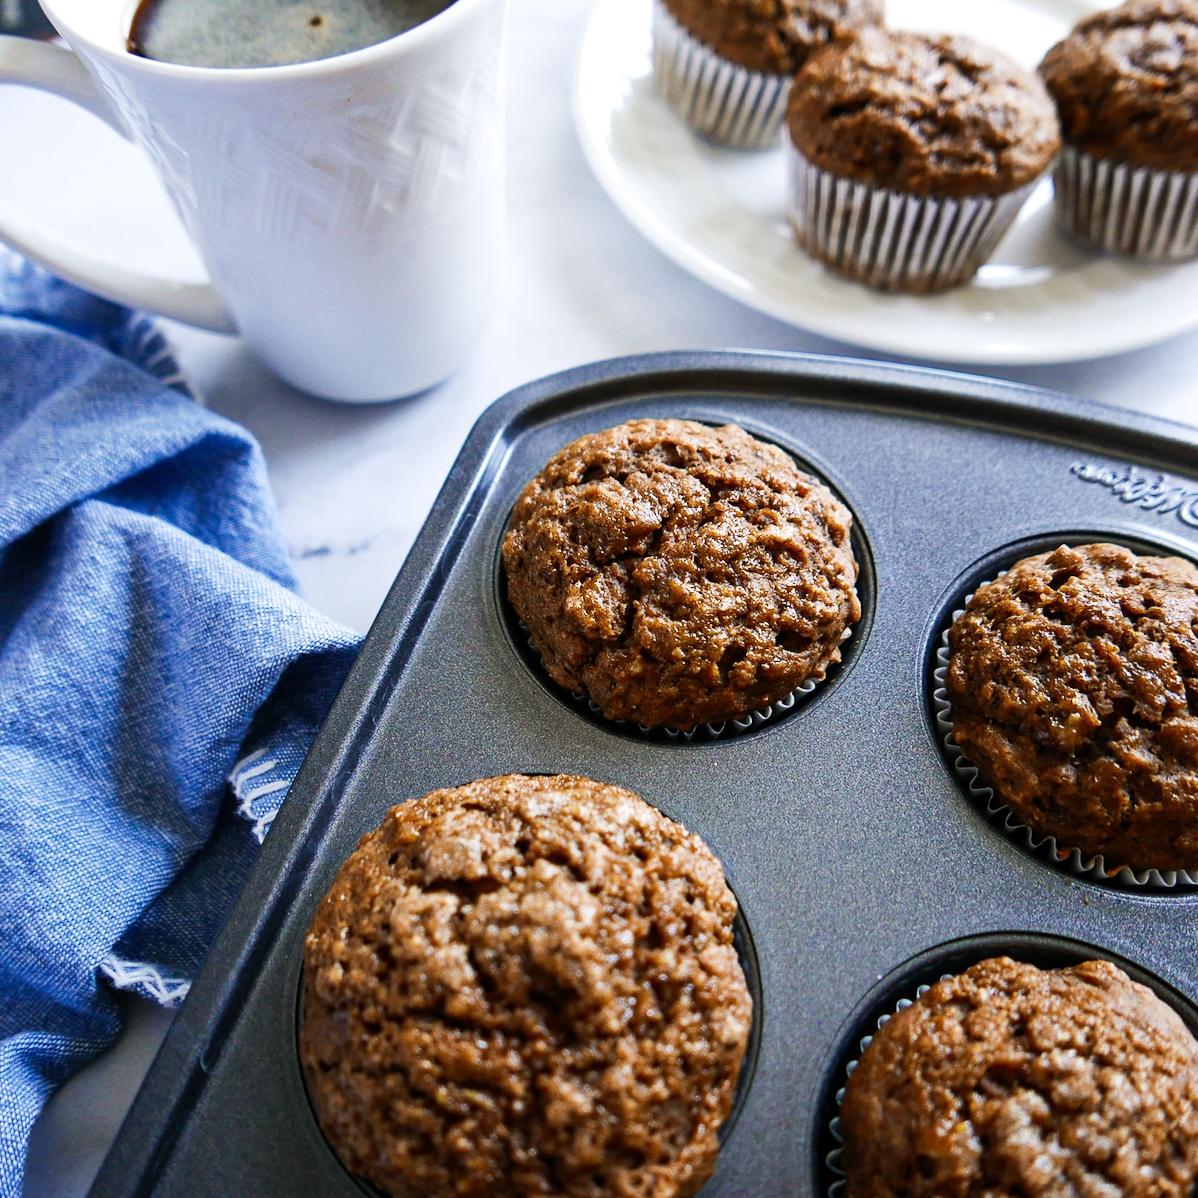  These Banana Ginger Muffins are like a comforting hug in every bite, with the delicious combination of ripe bananas, warm ginger, and a hint of nutmeg.